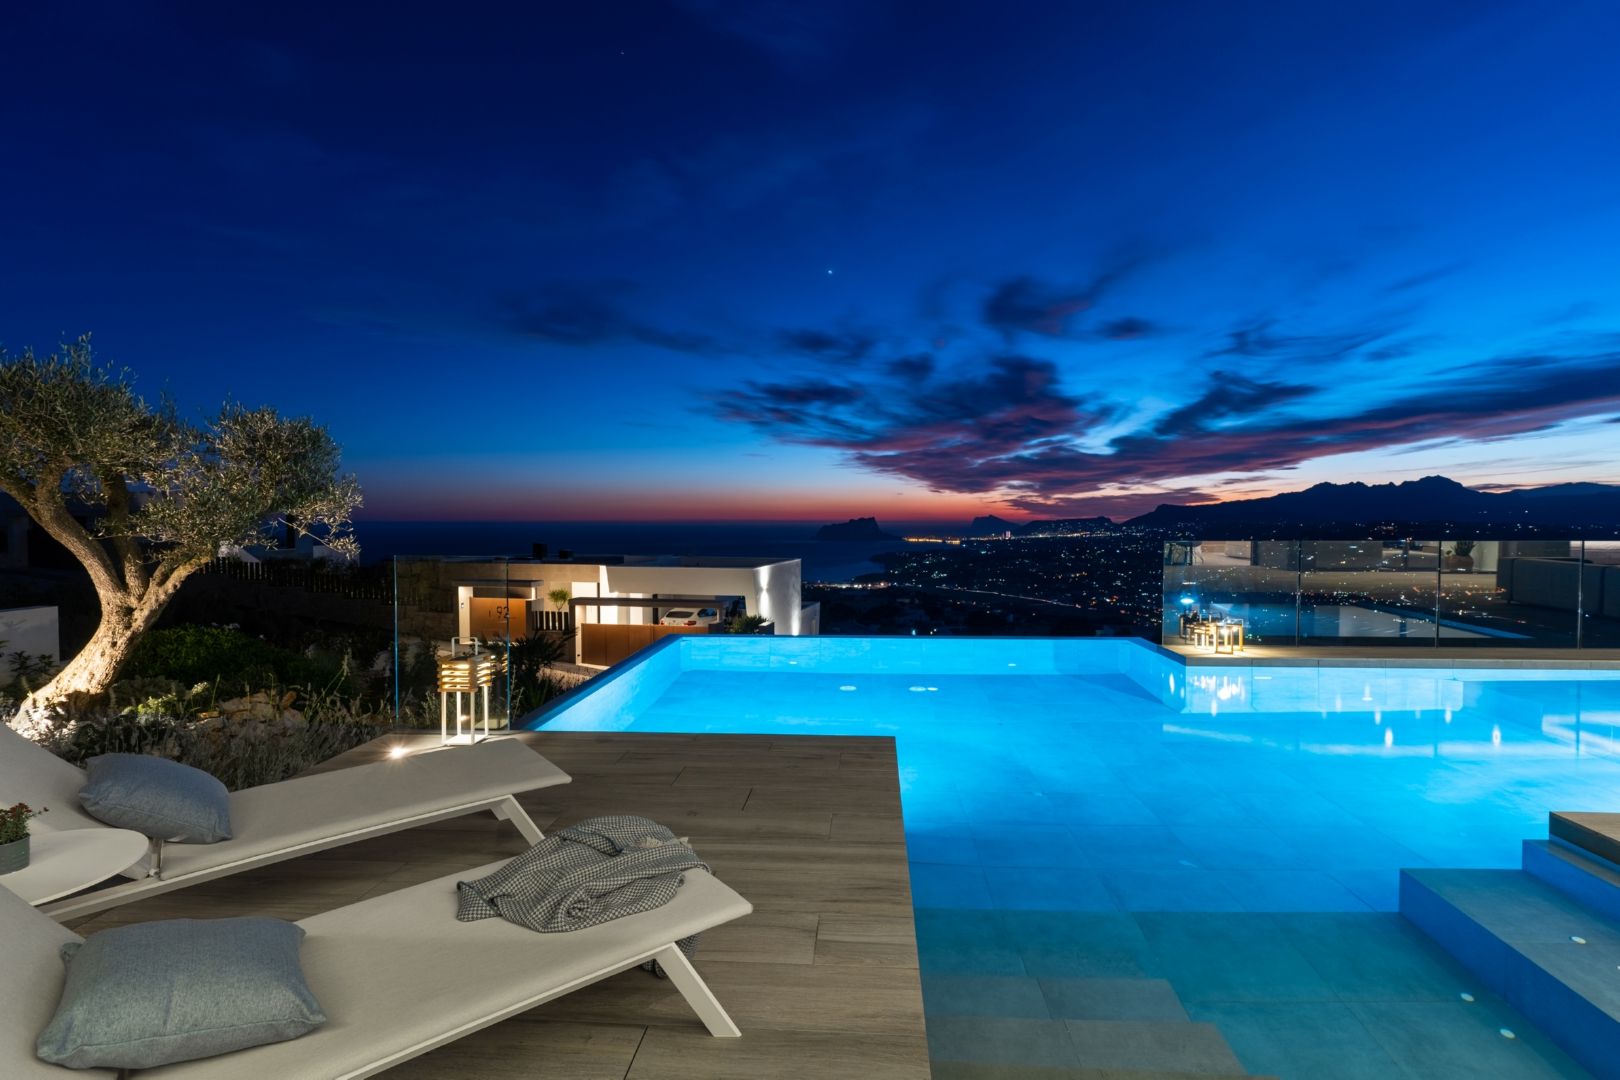 Cumbre del Sol: Luxurious and modern new build villa with breathtaking views